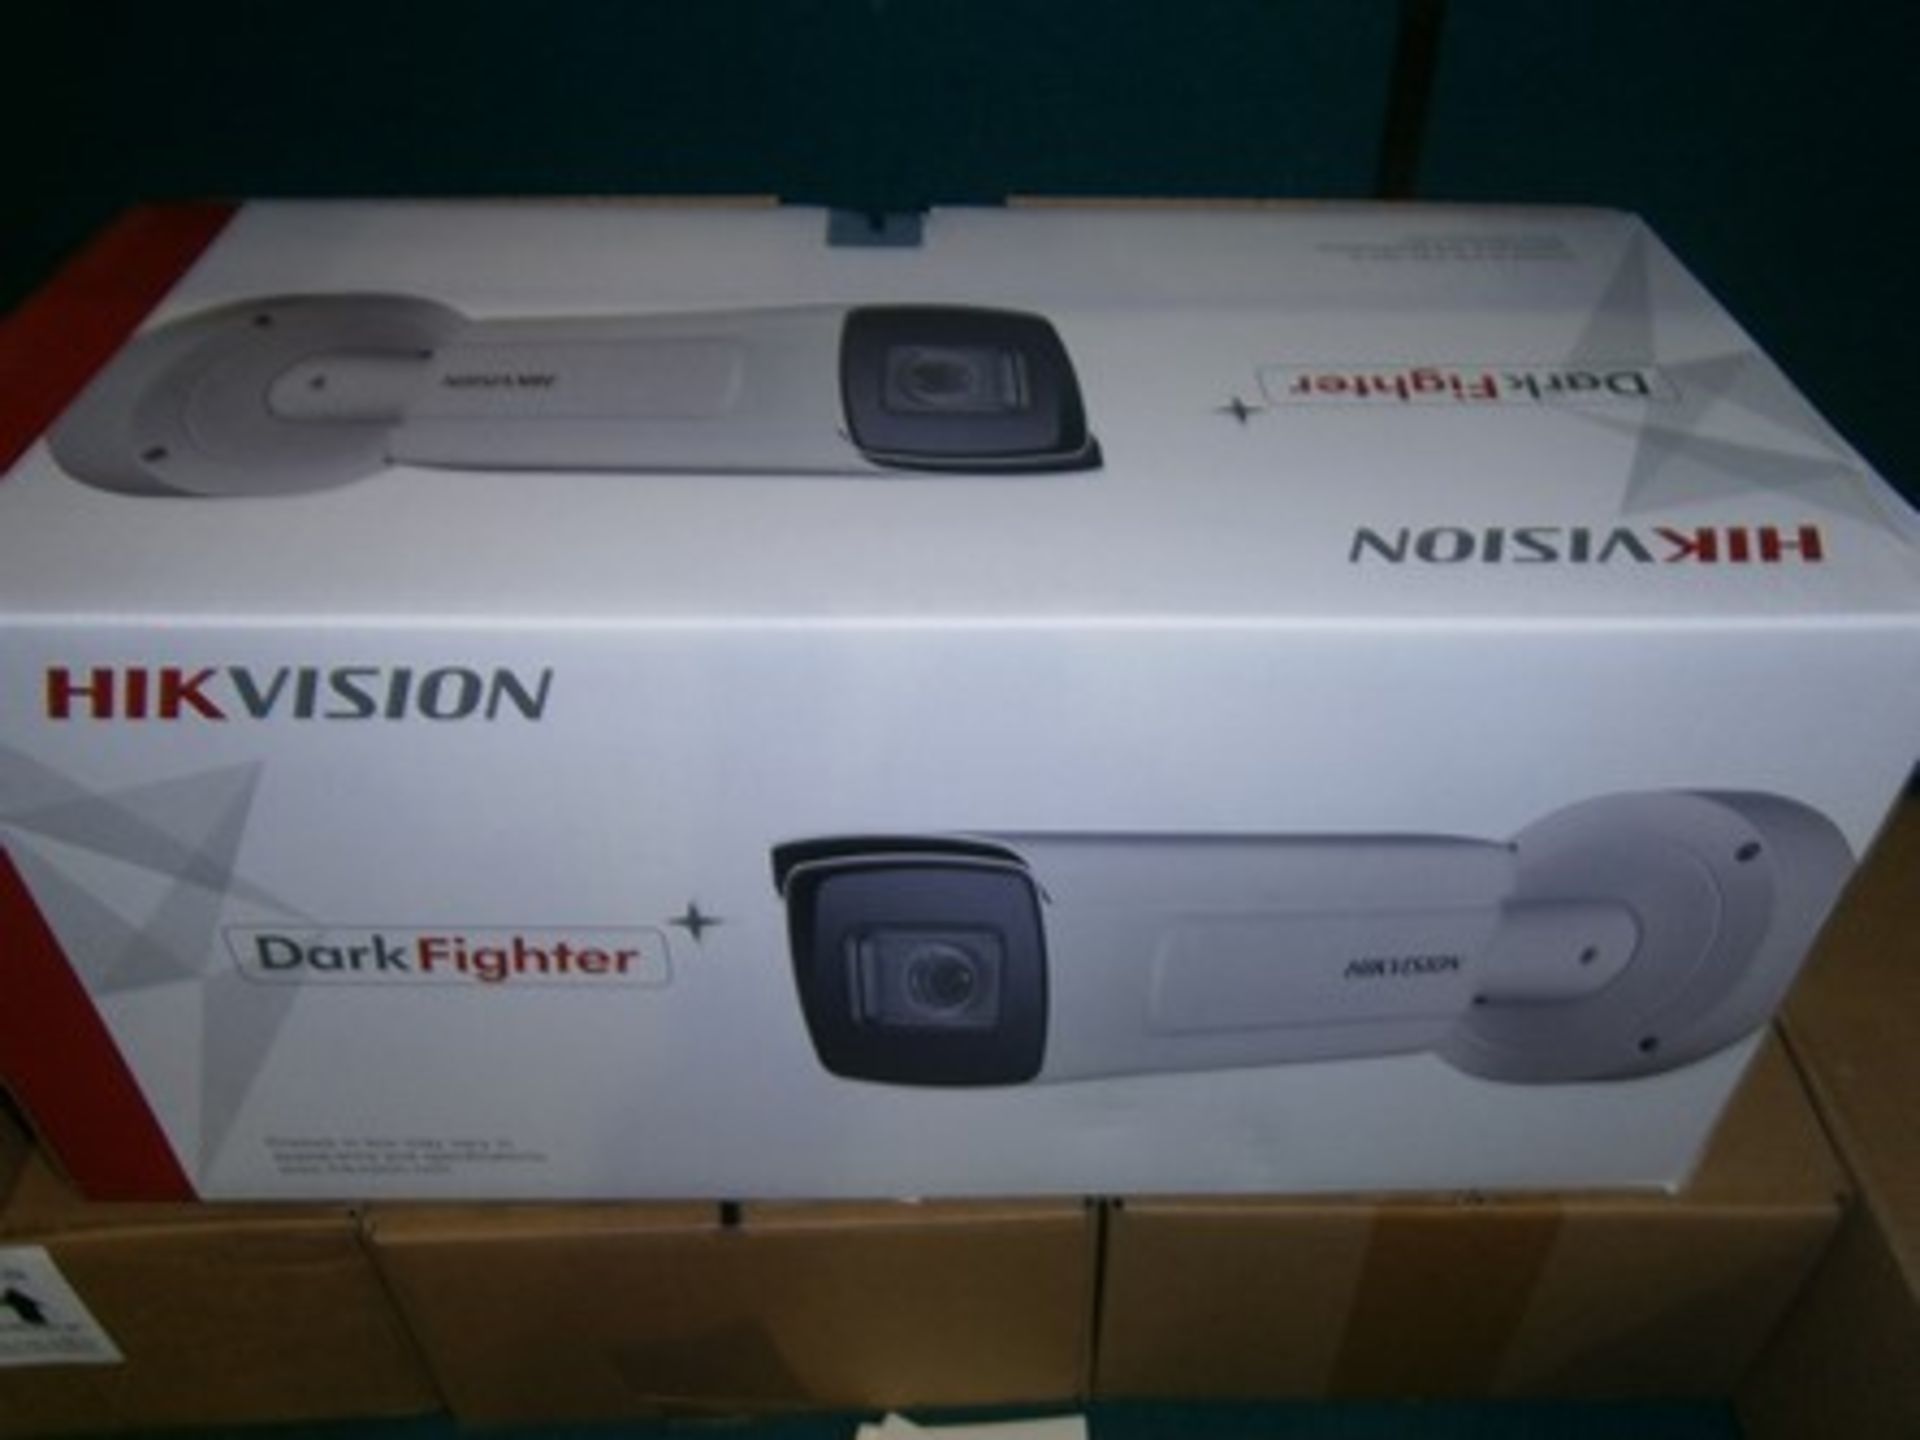 1 x Hikvision Dark Fighter camera, model DS-2CD5A46G0-125 - sealed new in box (C12C)